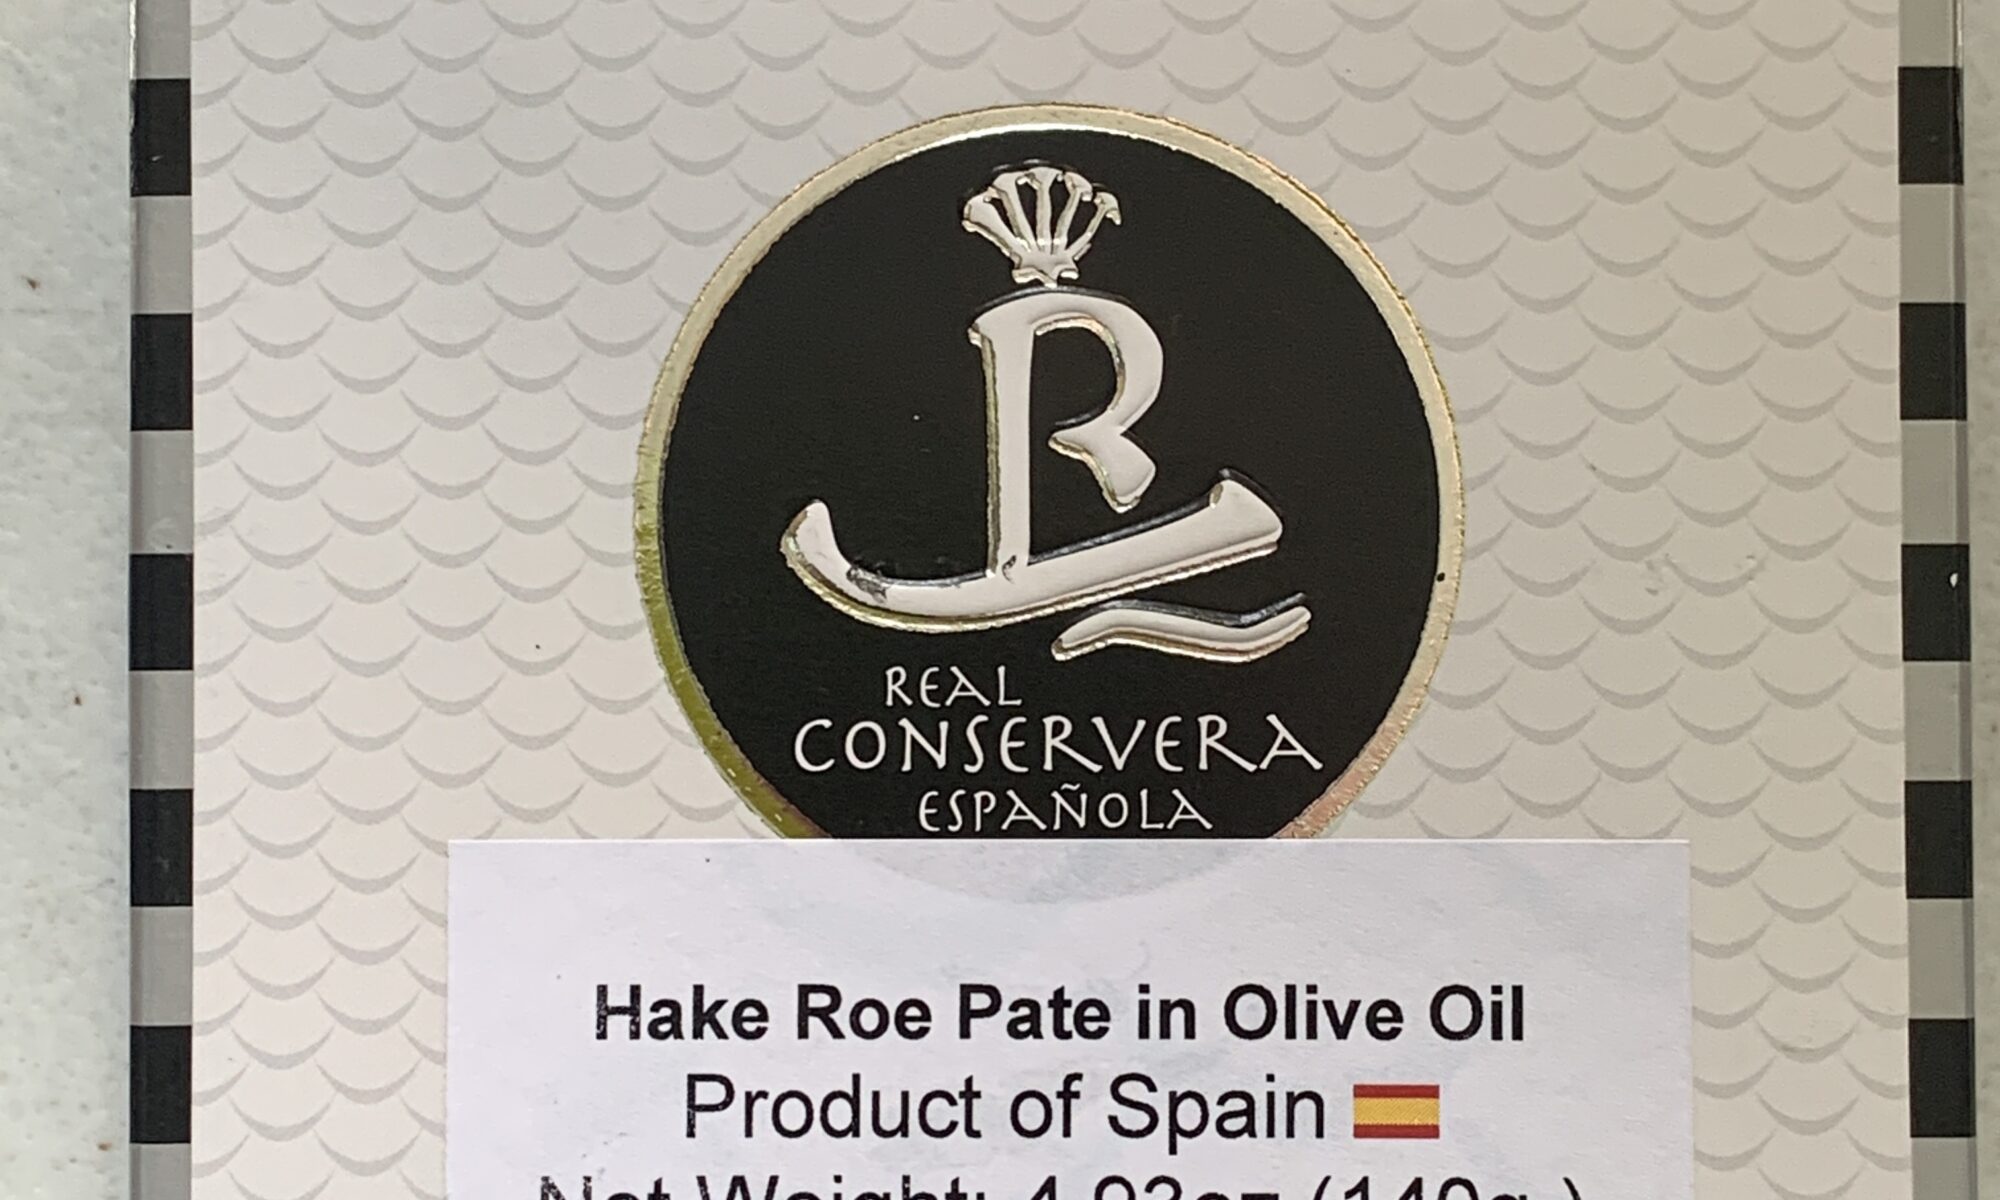 Image of the front of a package of Real Conservera Spicy Hake Roe Pâté